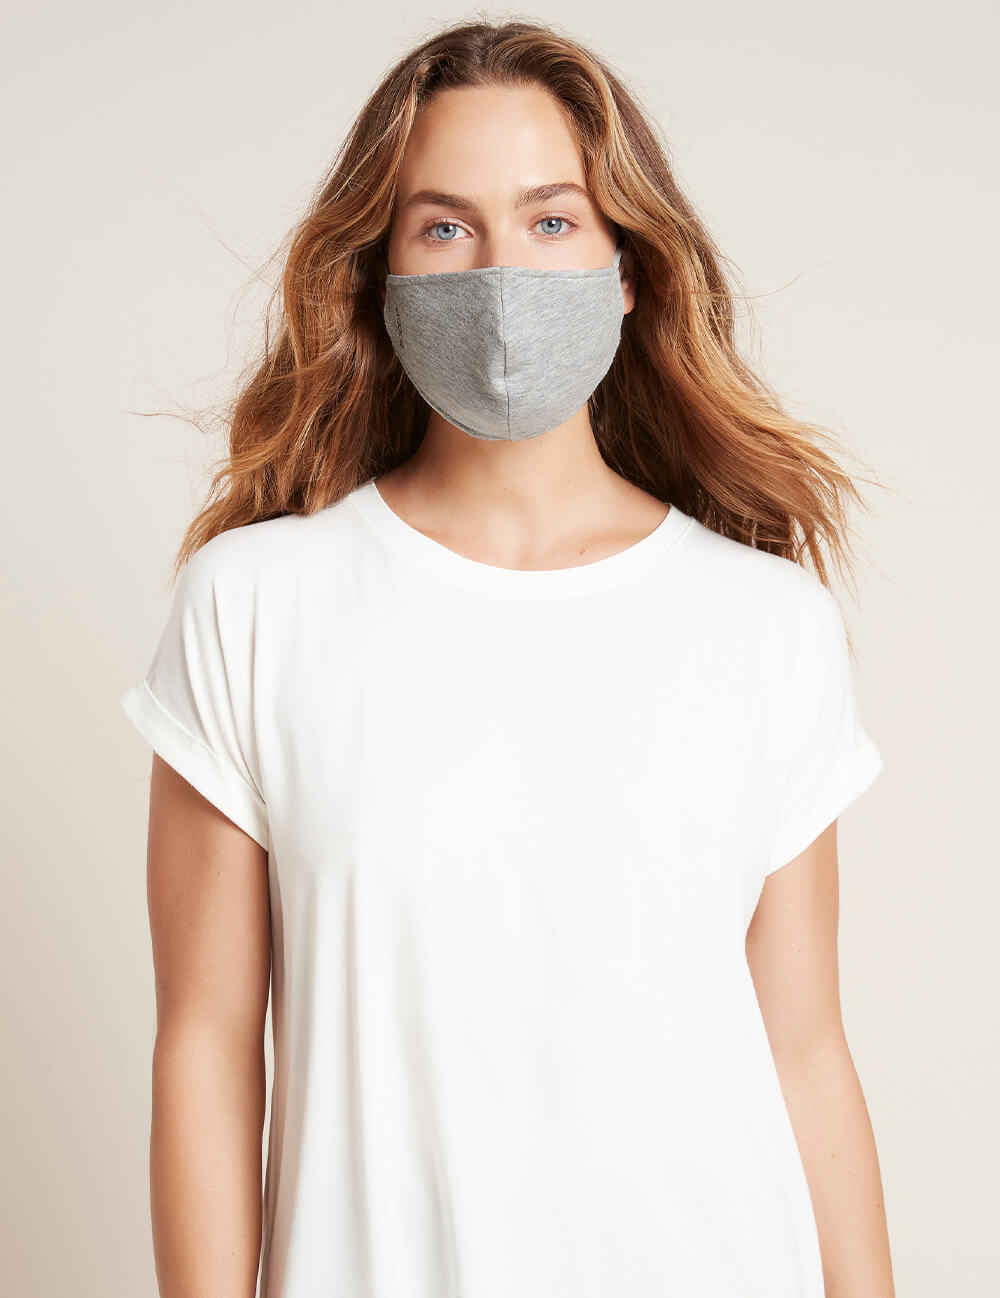 SoftTouch-Mask_light-grey-marl_front.jpg